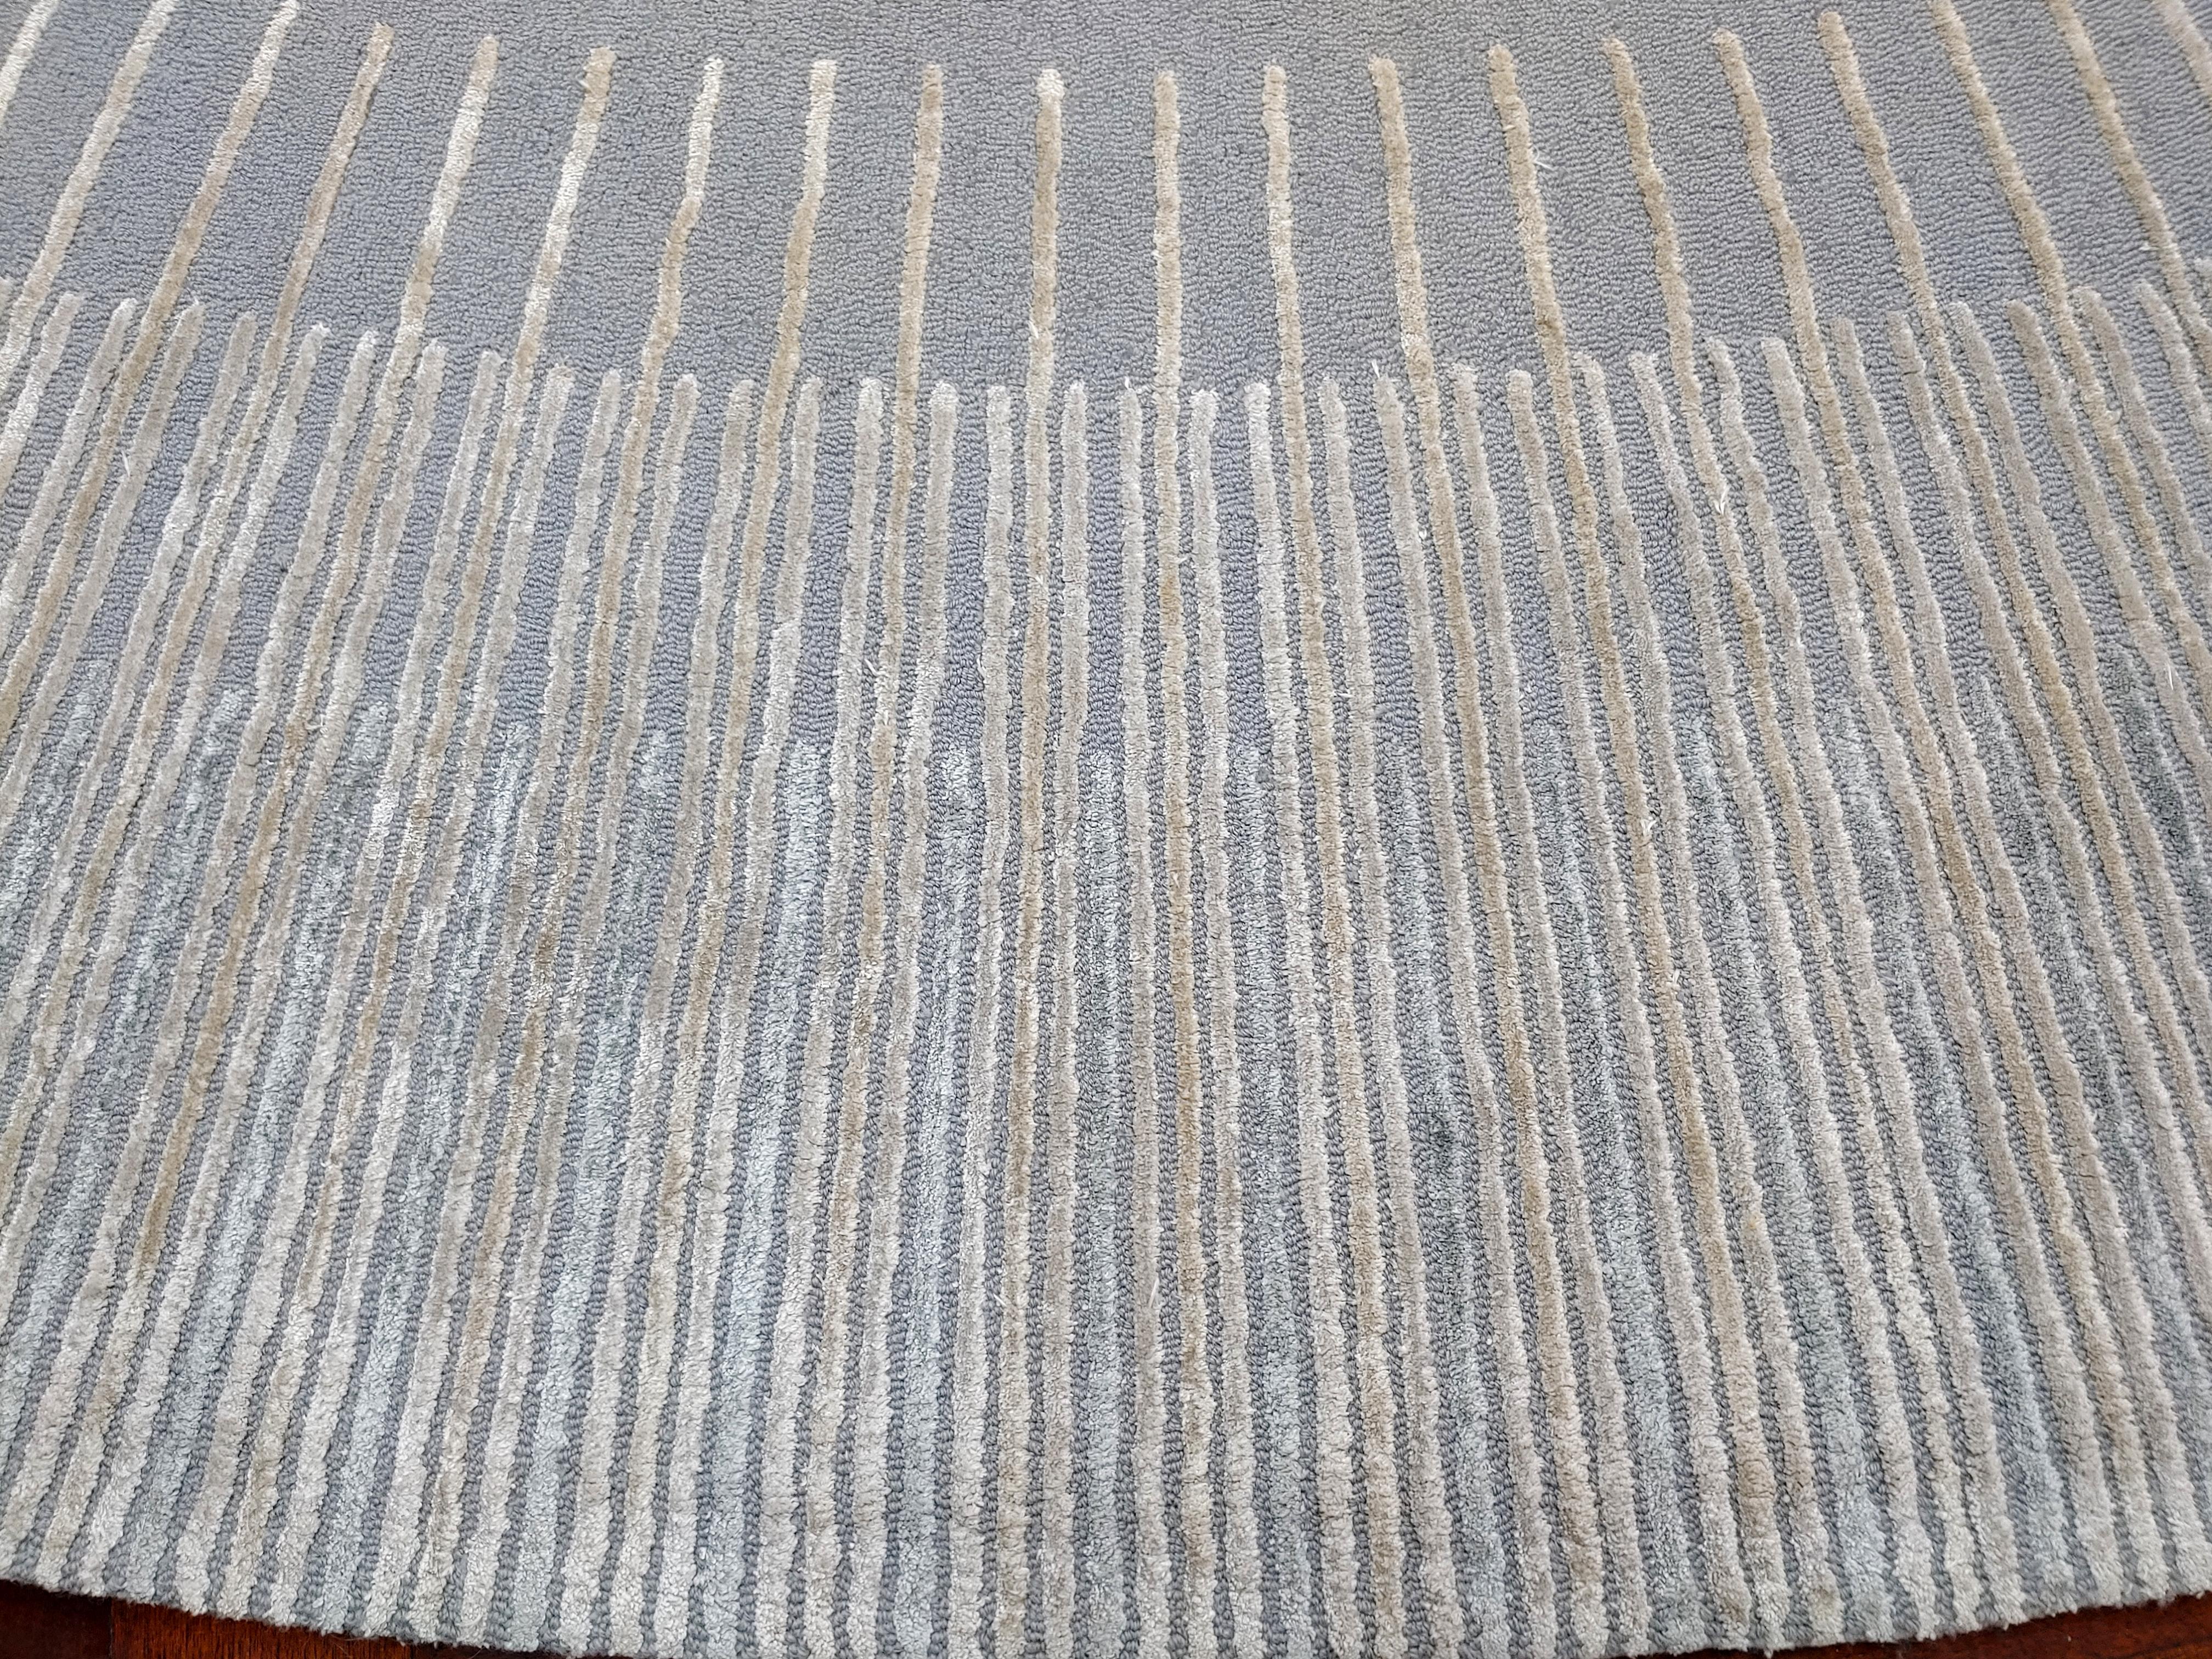 For your consideration is a magnificent and massive, round area rug or carpet, in a light blue gray, by Edward Fields, circa 1980s. In very good vintage condition. The dimensions are 192